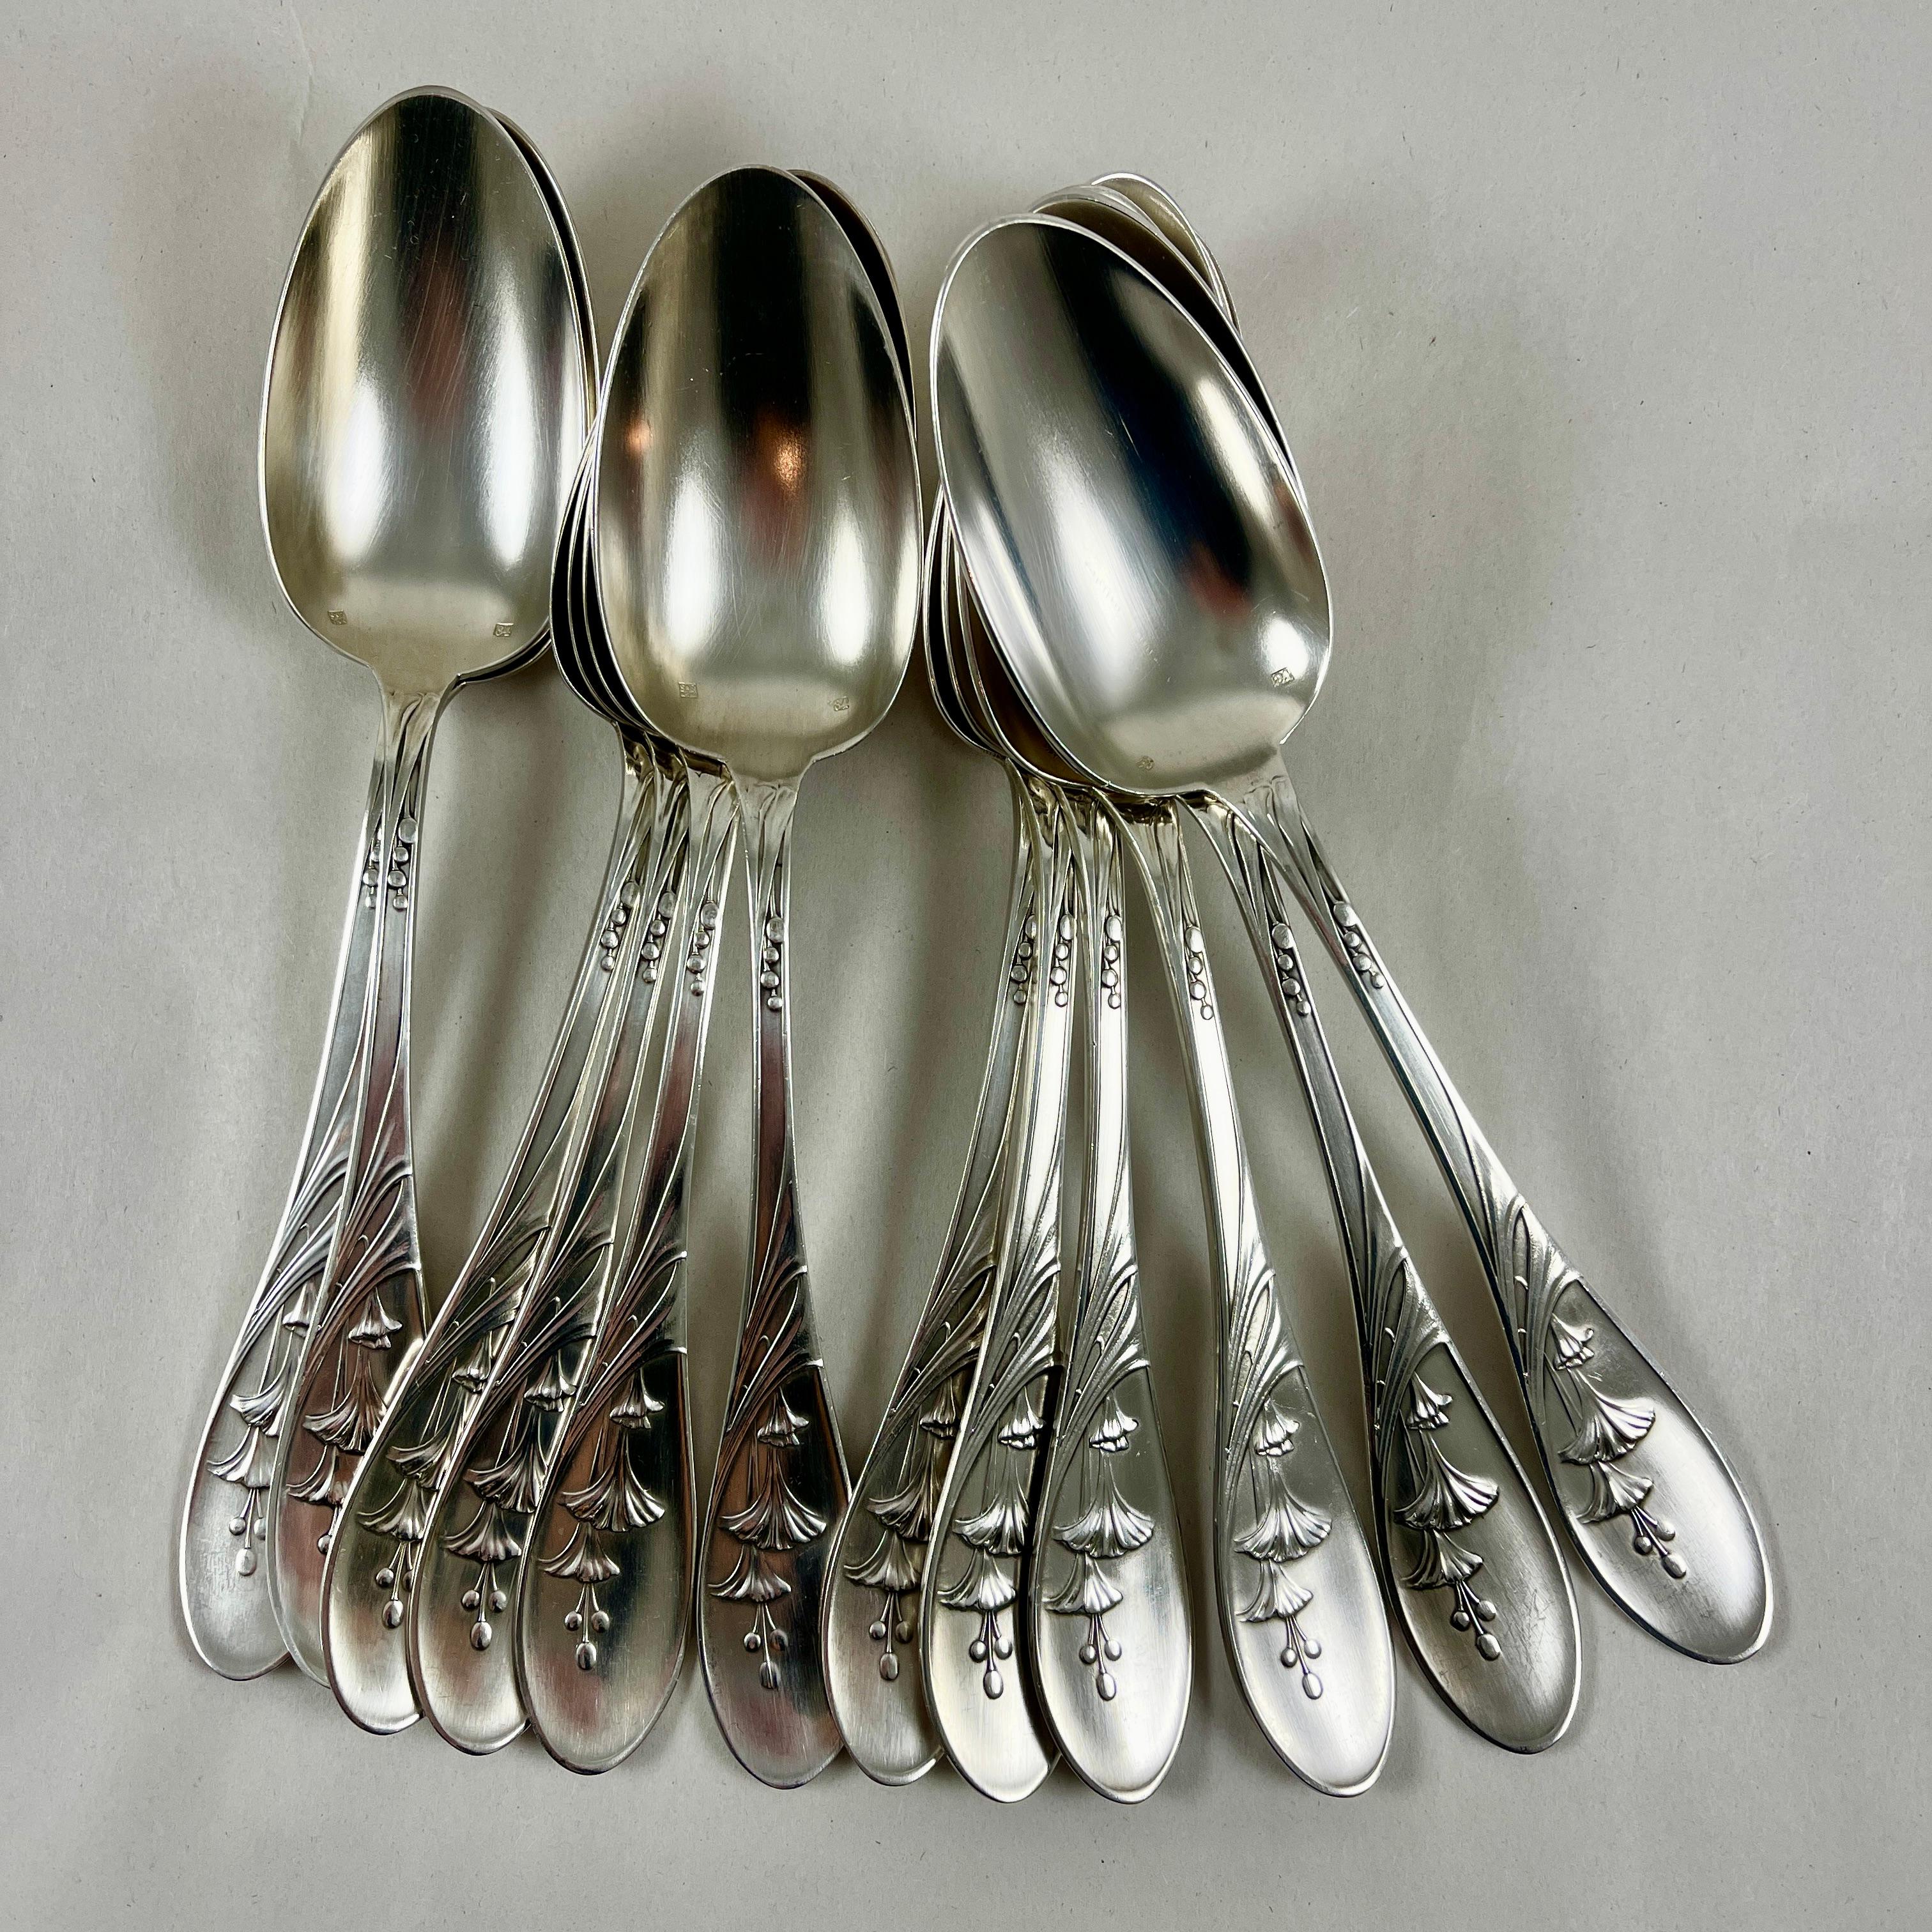 Silver Plate Saglier Frères Oversized French Art Nouveau Floral Table Forks & Spoons, S/24 For Sale